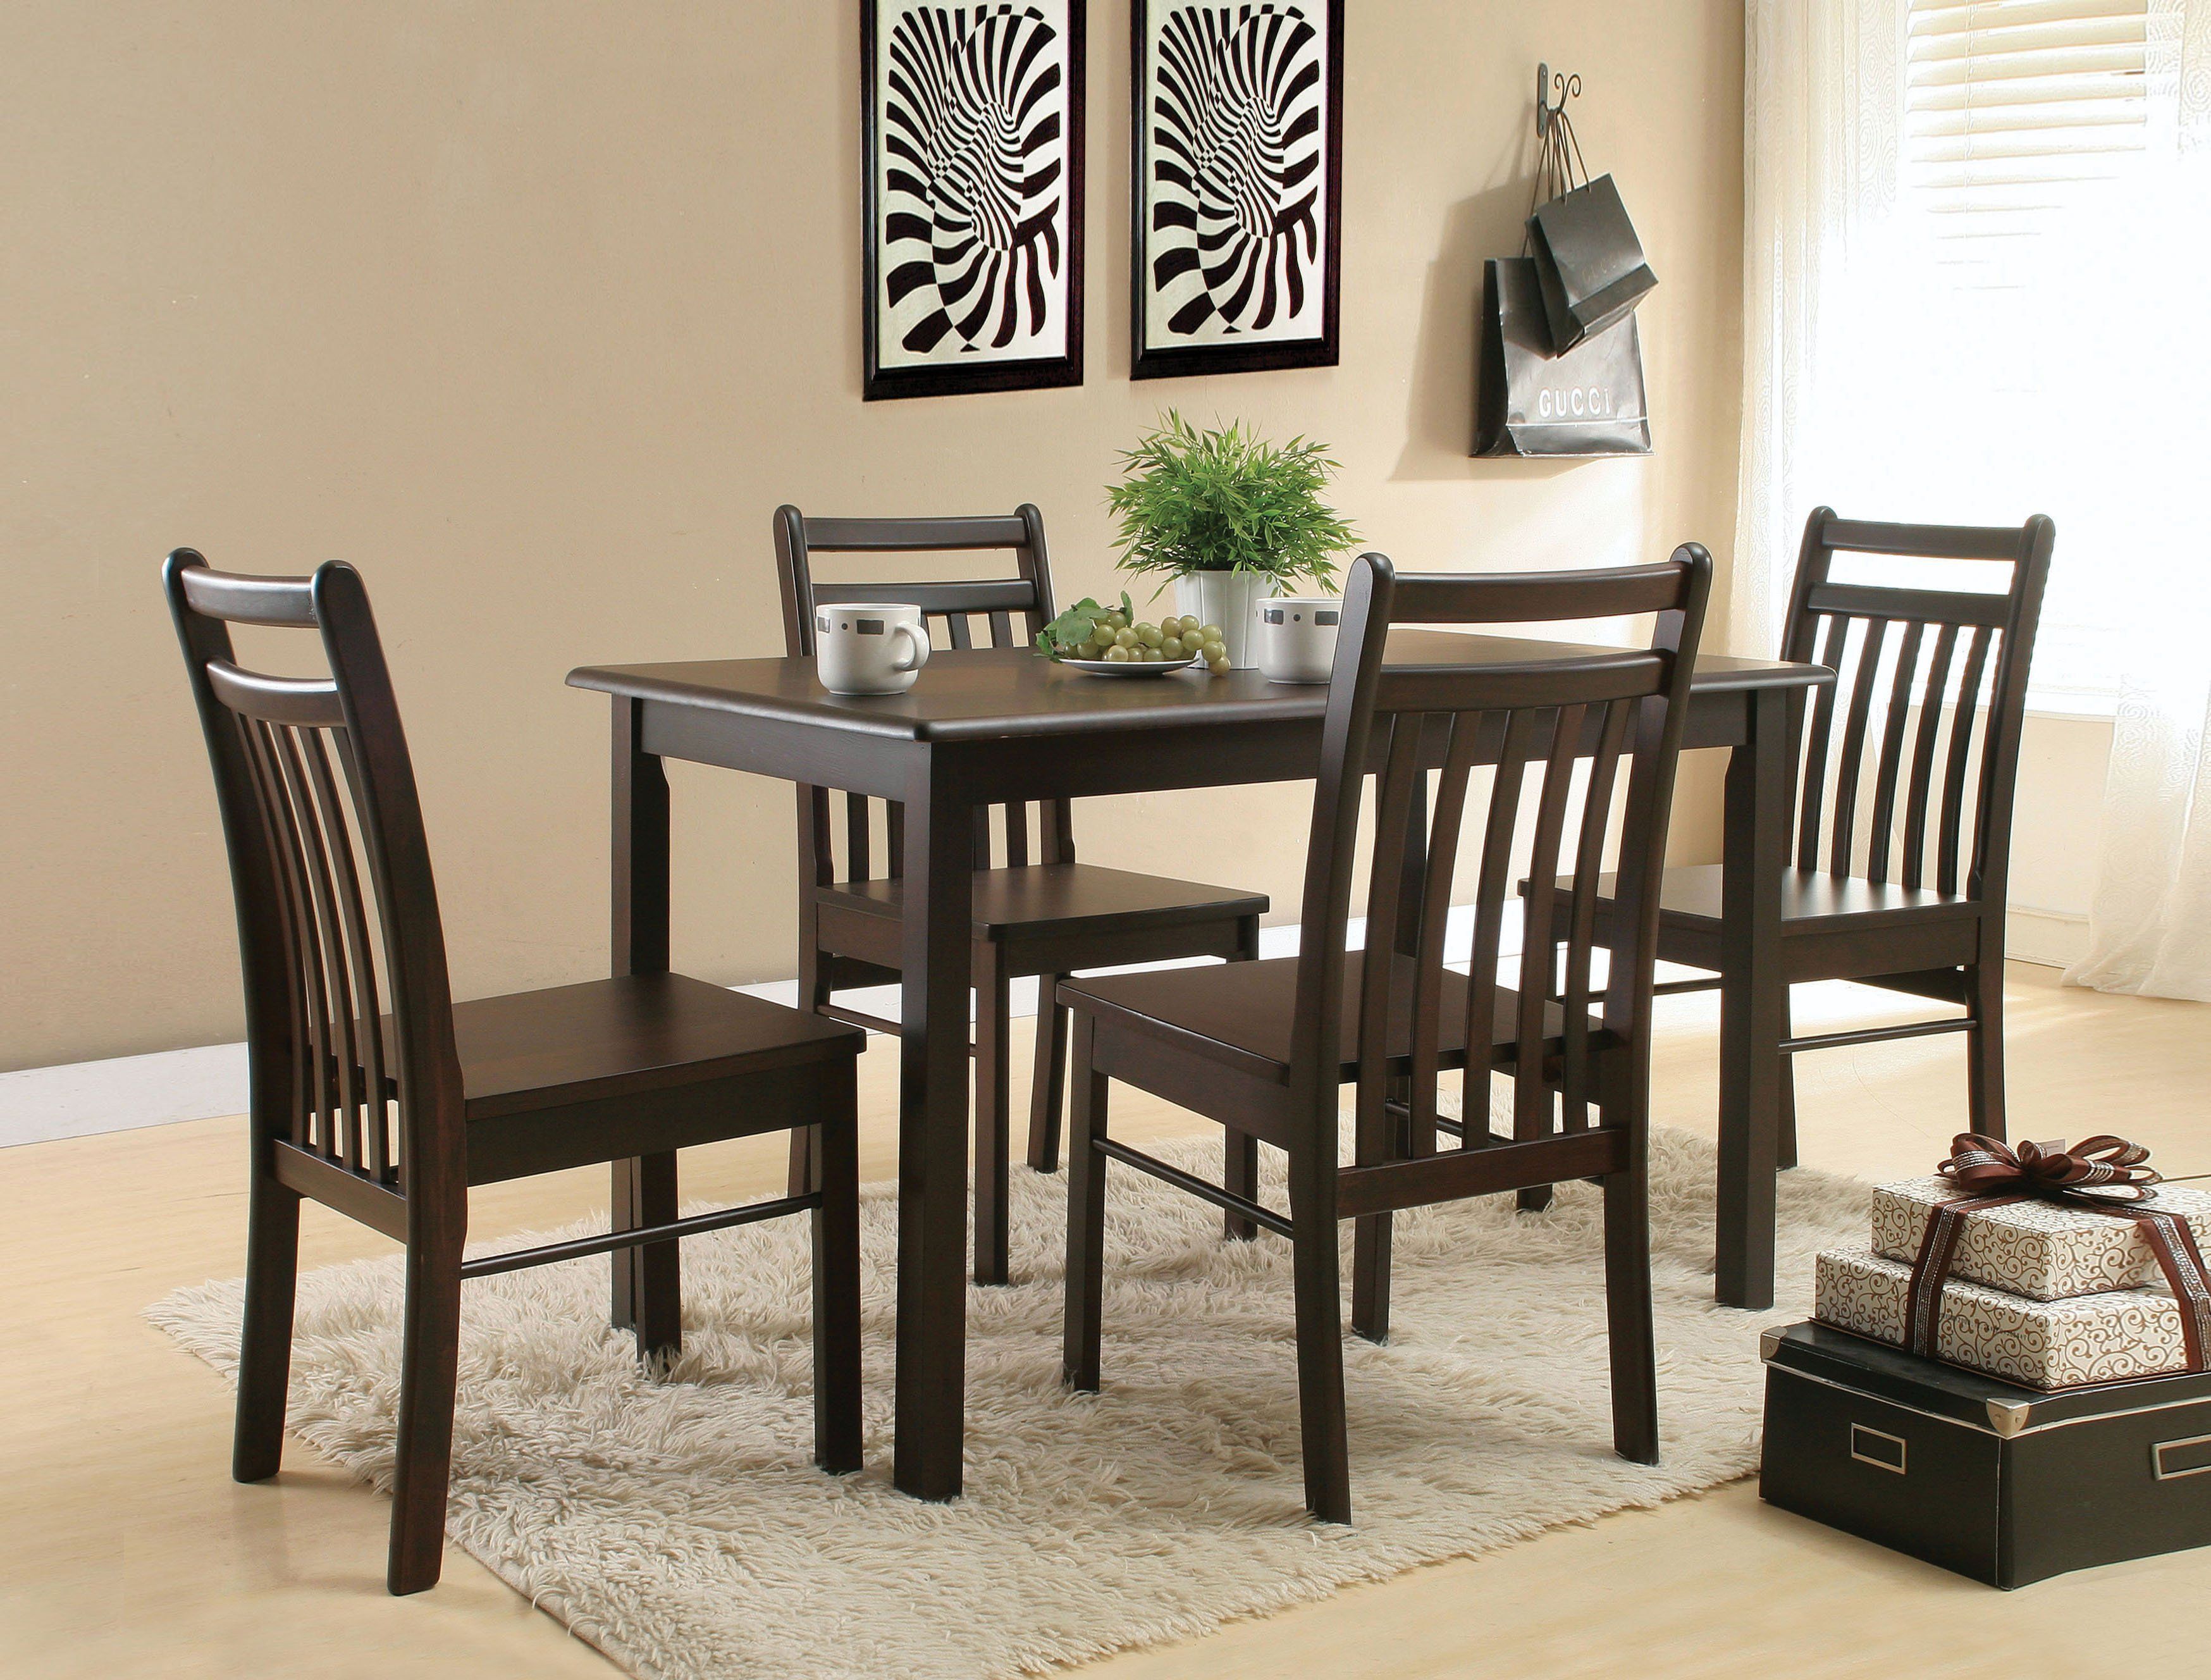 Serra Ii Dining Table, Espresso Brown | Products | Dining Chairs With Regard To Most Recent Autberry 5 Piece Dining Sets (View 5 of 20)